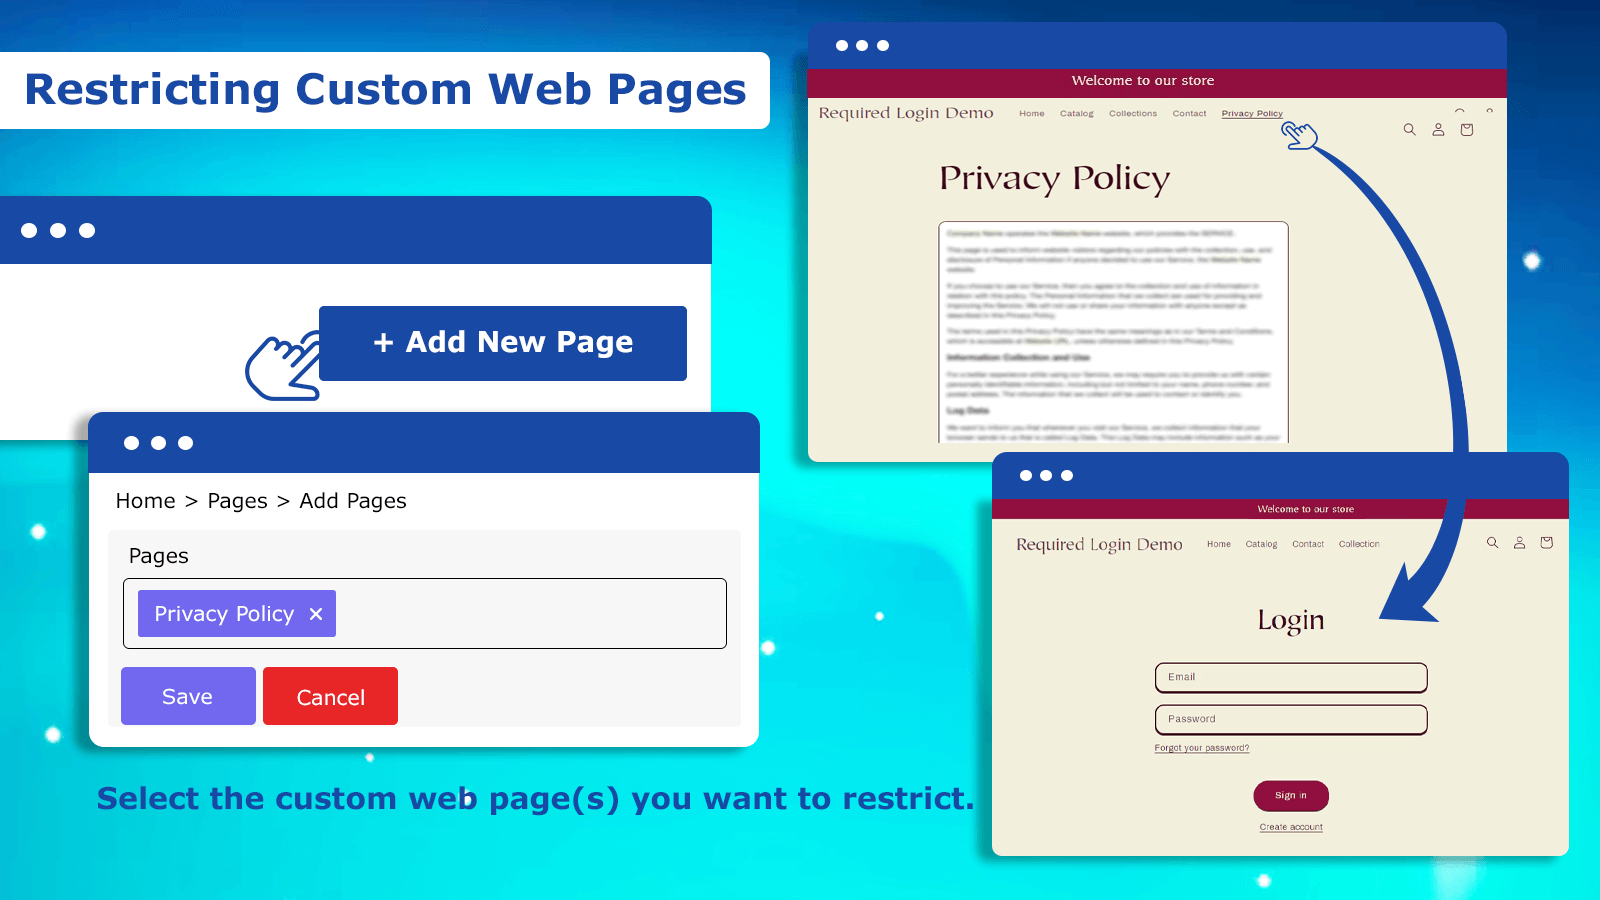 Restricting custom web pages